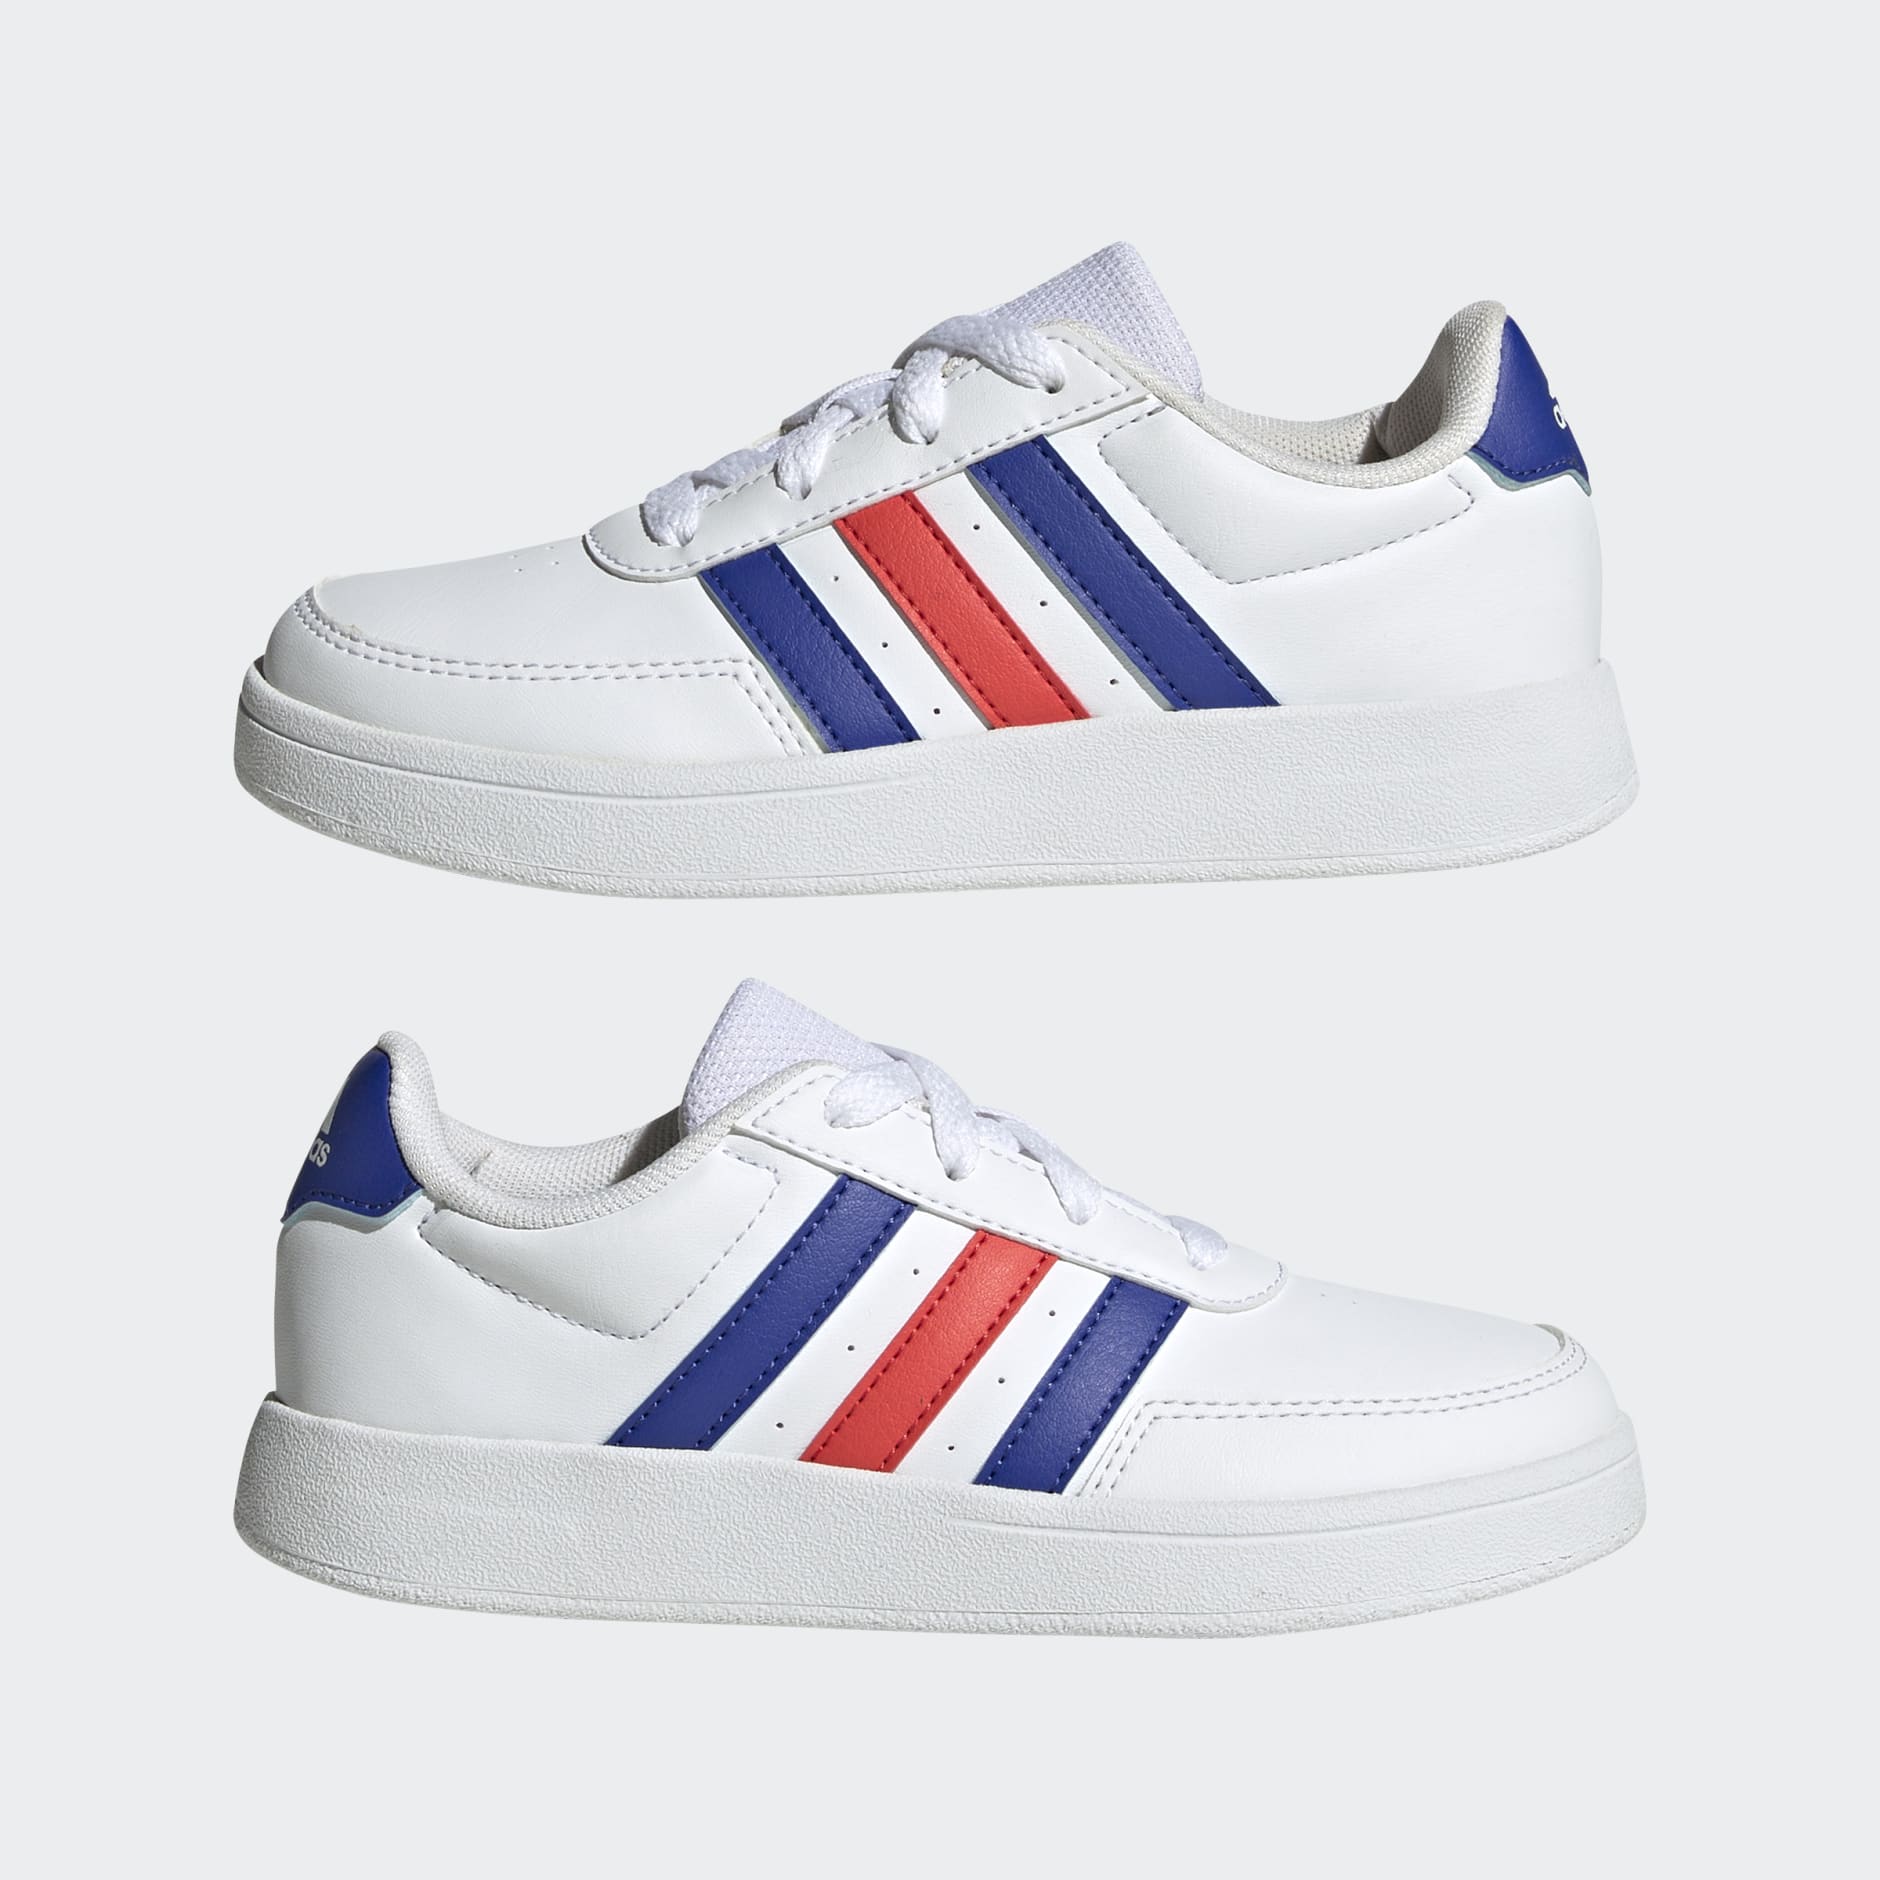 Shoes - Breaknet Lifestyle Court Lace Shoes - White | adidas South Africa